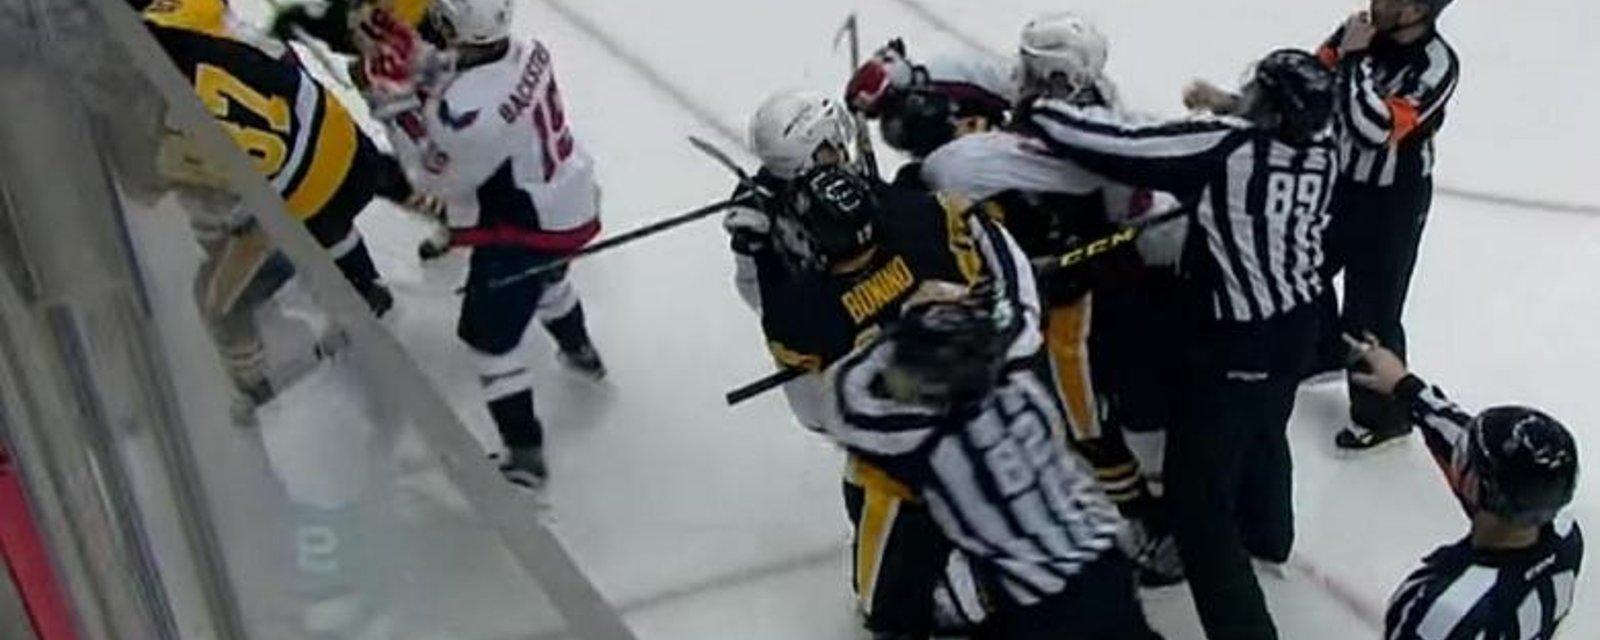 Crosby and Oshie trade punches in post whistle altercation.